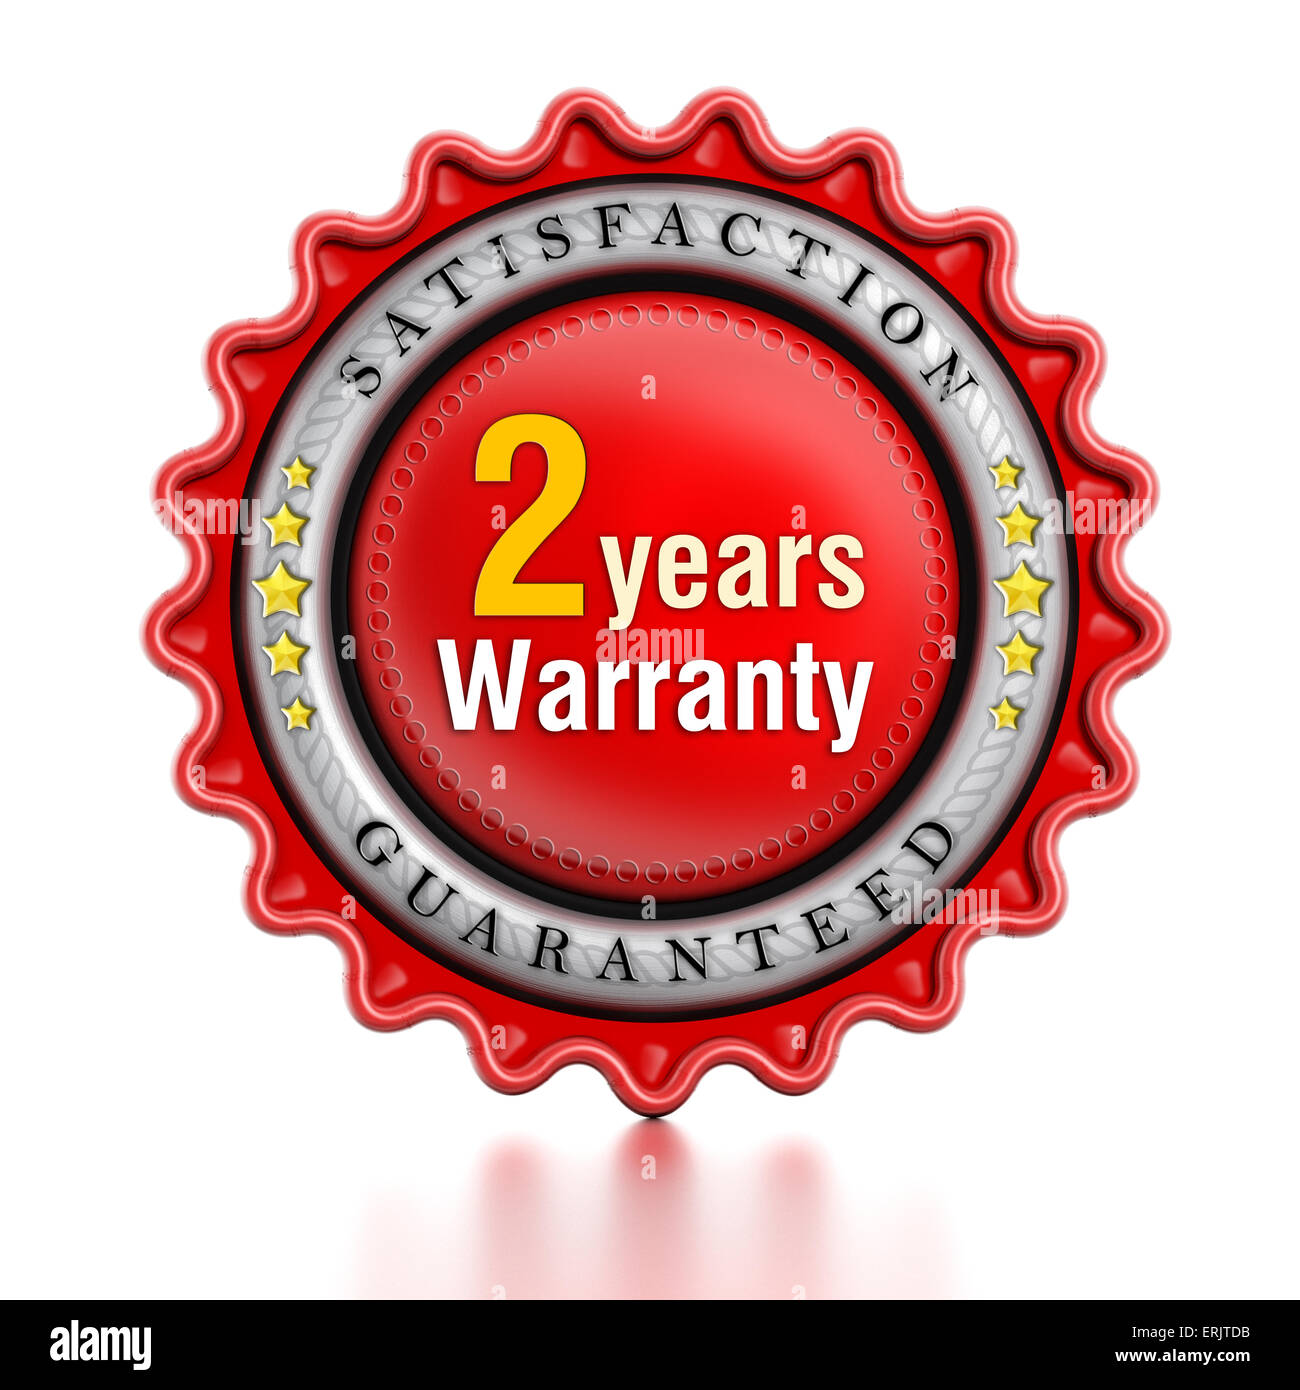 2 year warranty stamp isolated on white background. Stock Photo